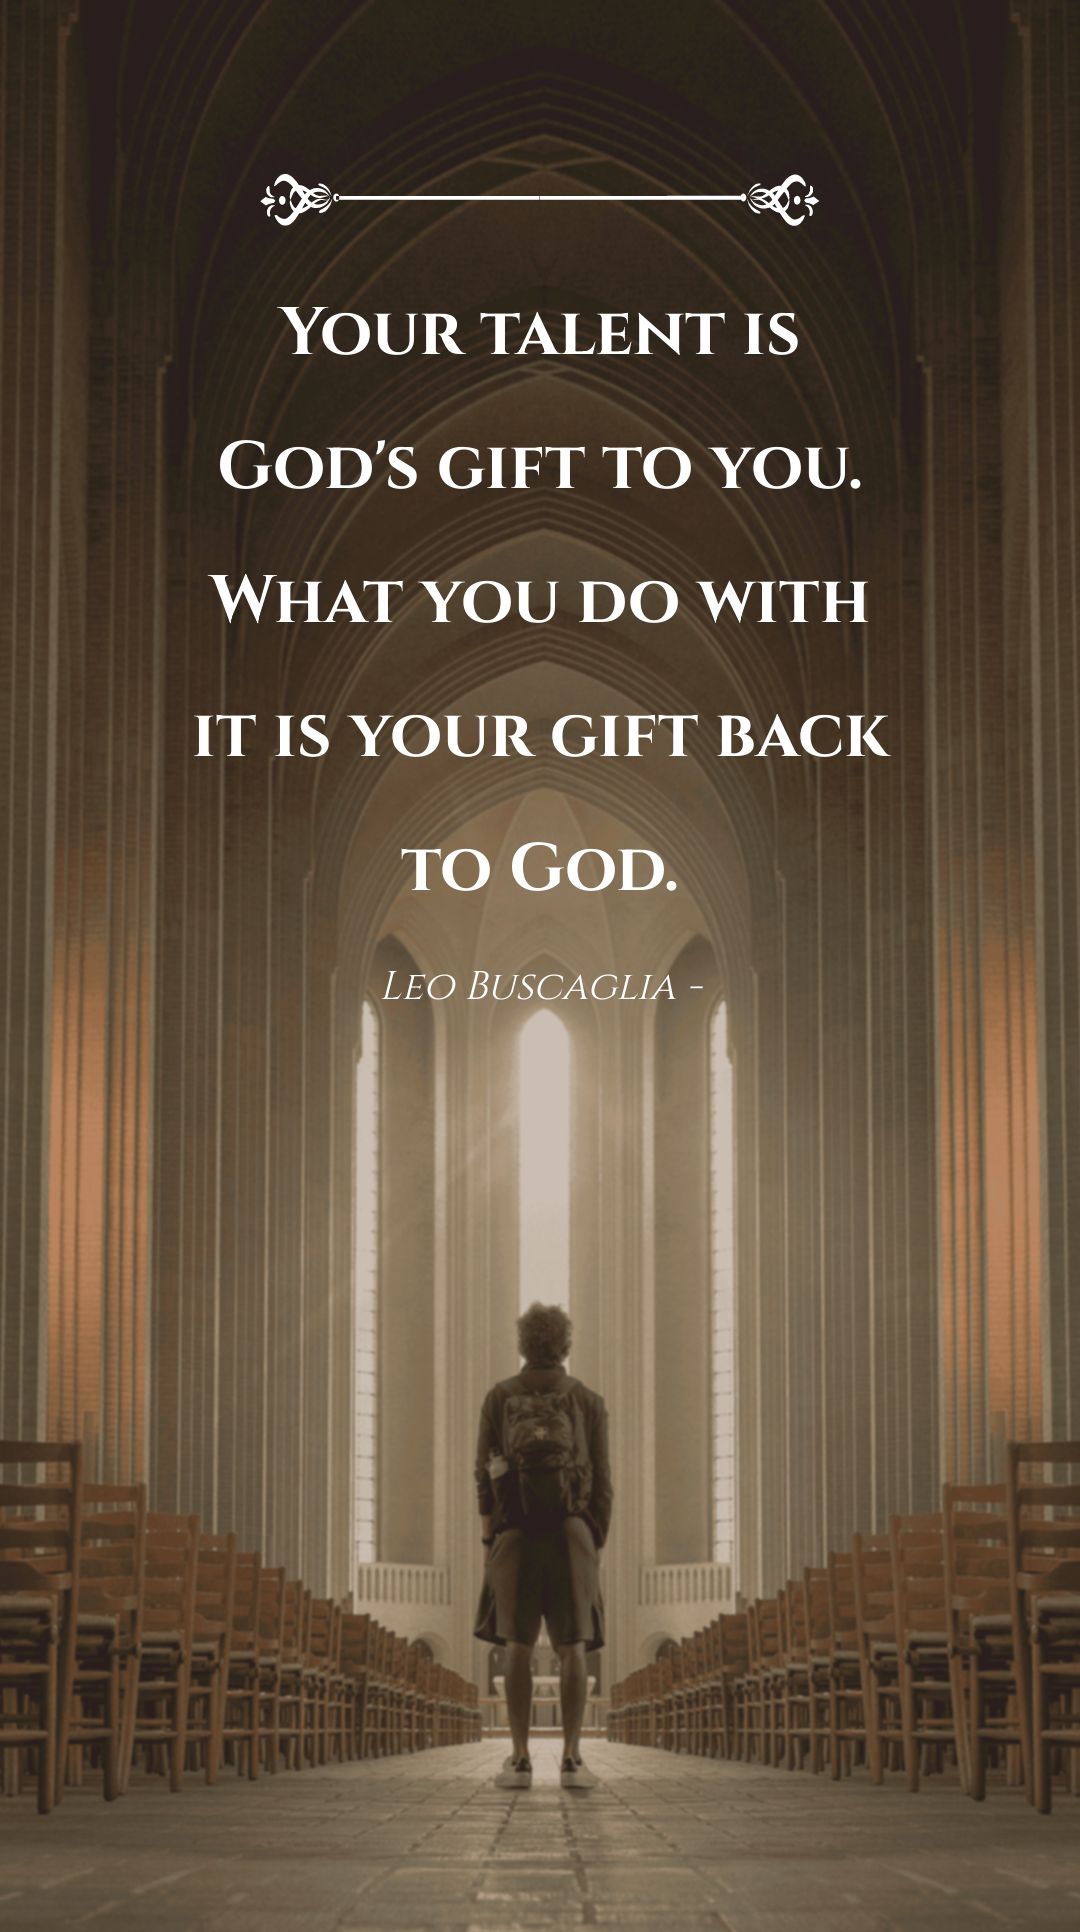 Leo Buscaglia - Your talent is God's gift to you. What you do with it is your gift back to God.